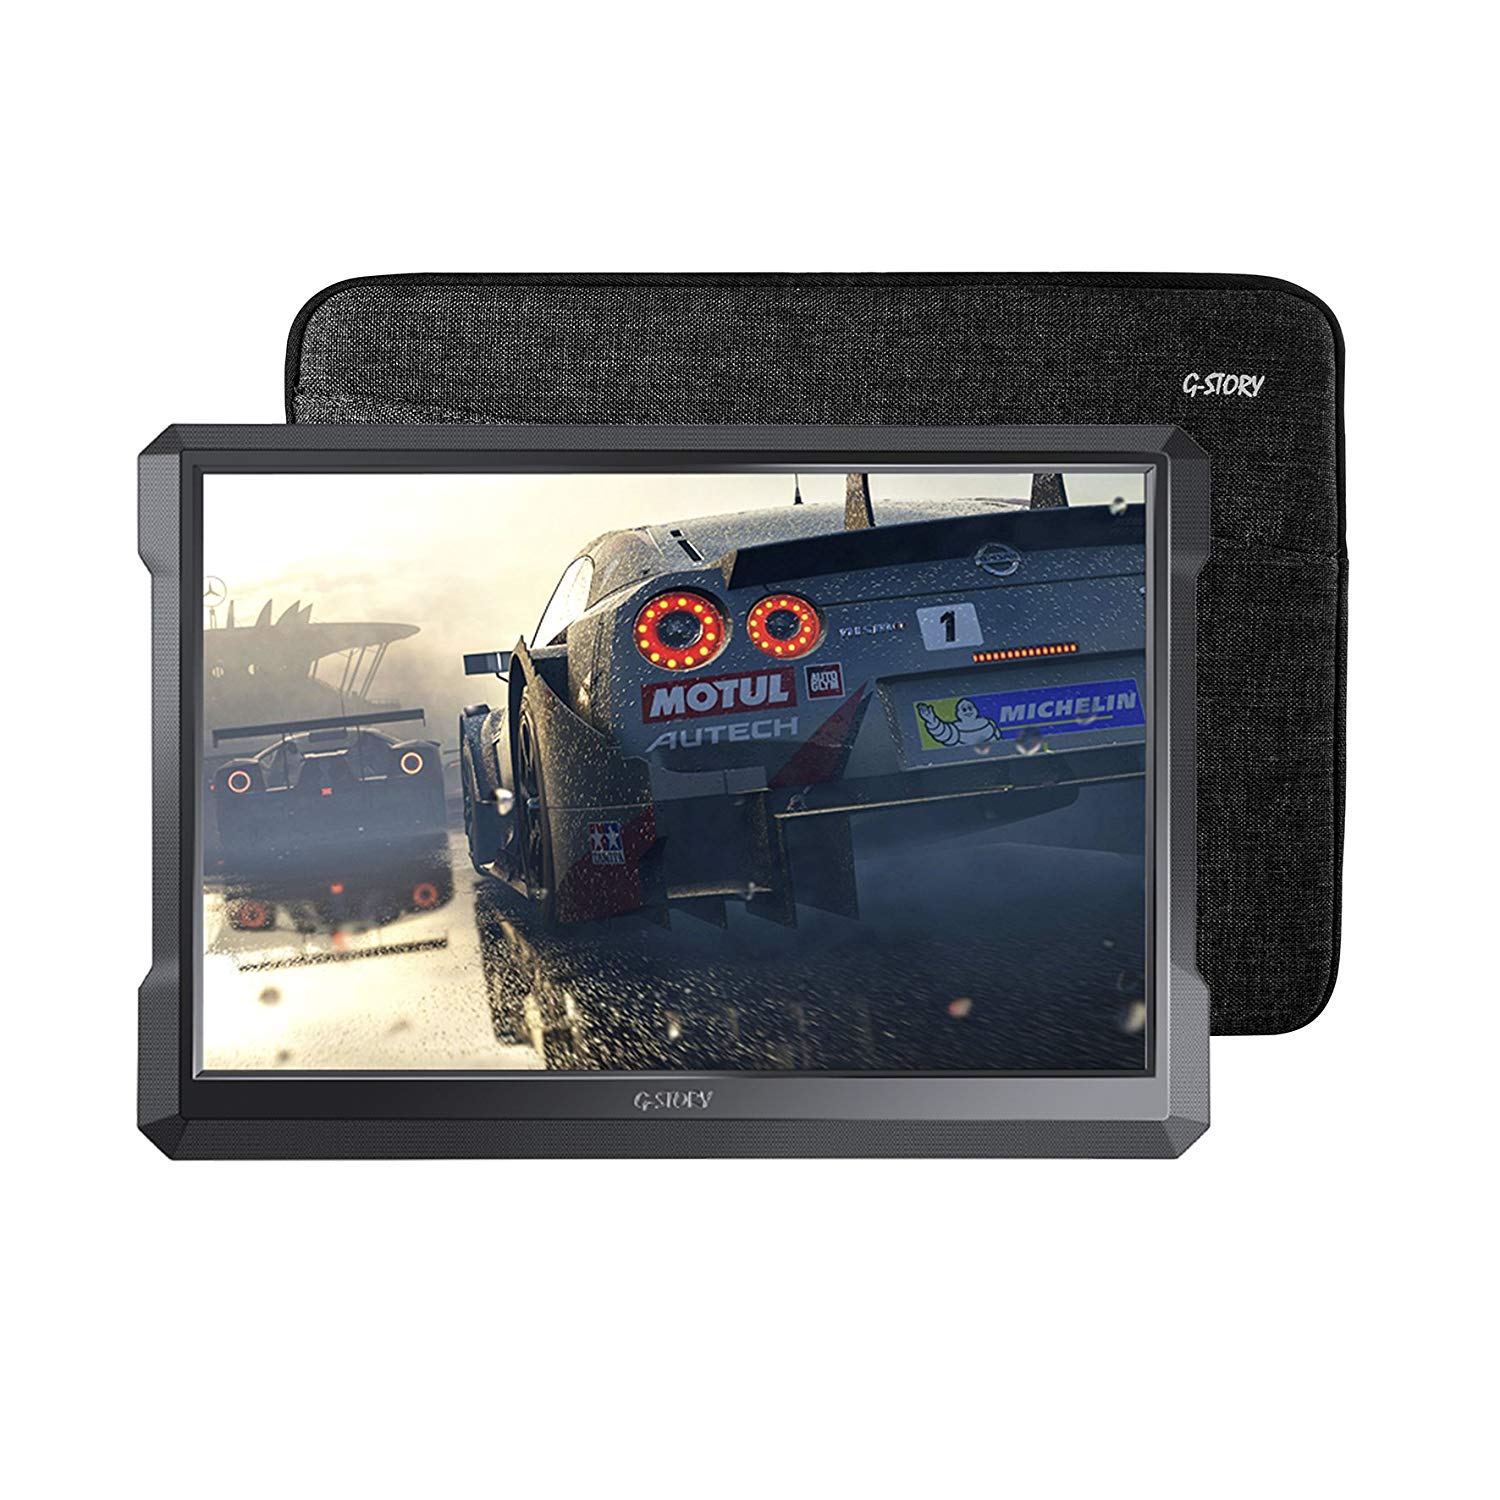  G-STORY 15.6 Inch IPS 4k 60Hz Portable Monitor Gaming